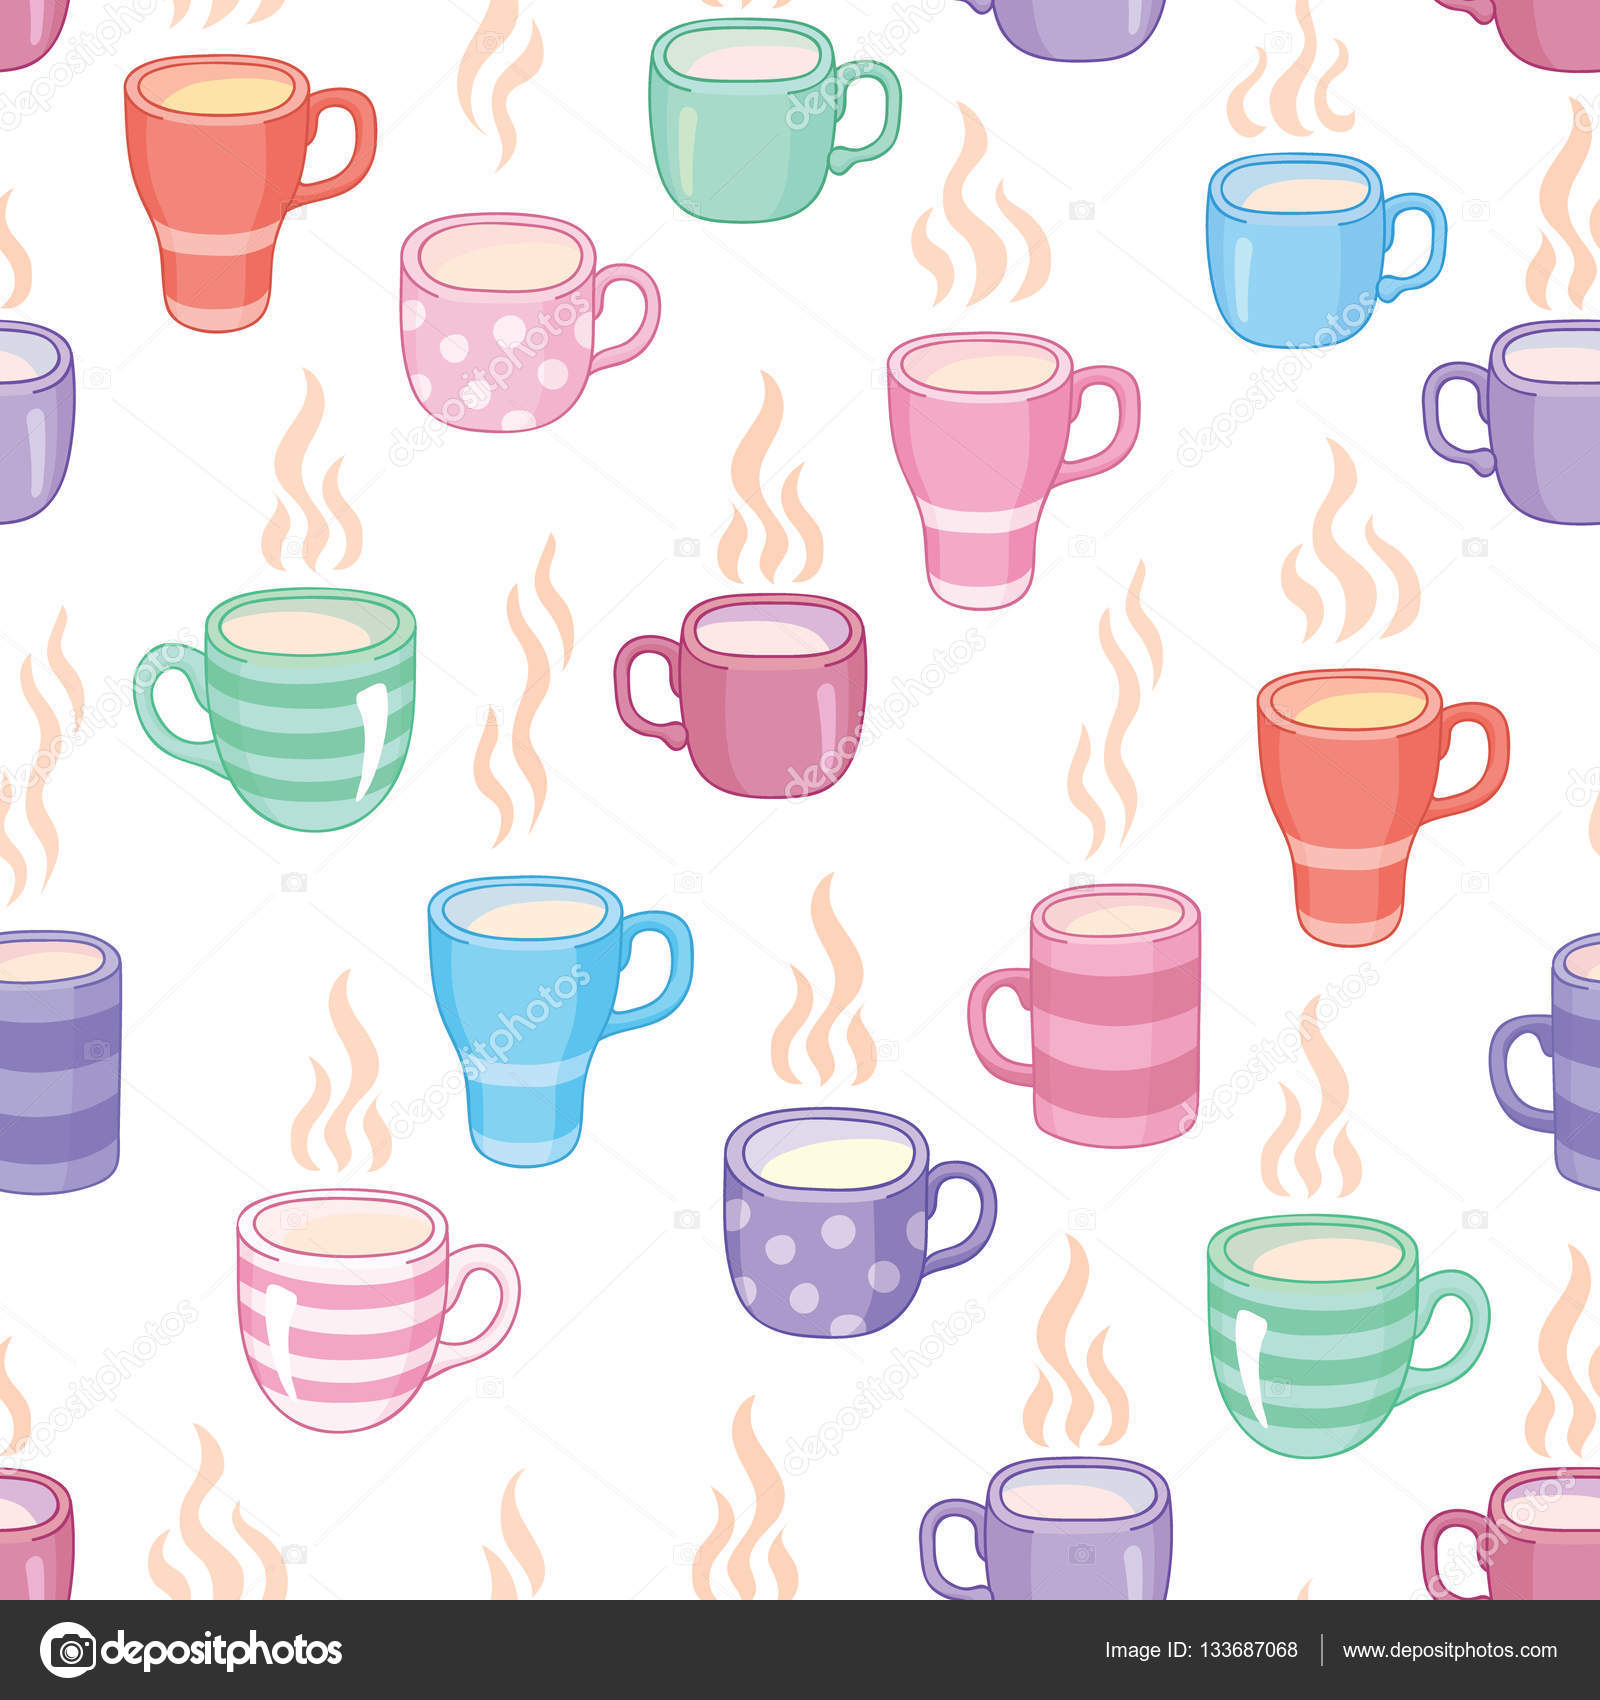 Premium Vector  Cute cups pattern. seamless background with modern tea mugs.  endless repeatable kitchen texture with teacups for printing. wrapping and  wallpaper design. colored flat vector illustration for decor.